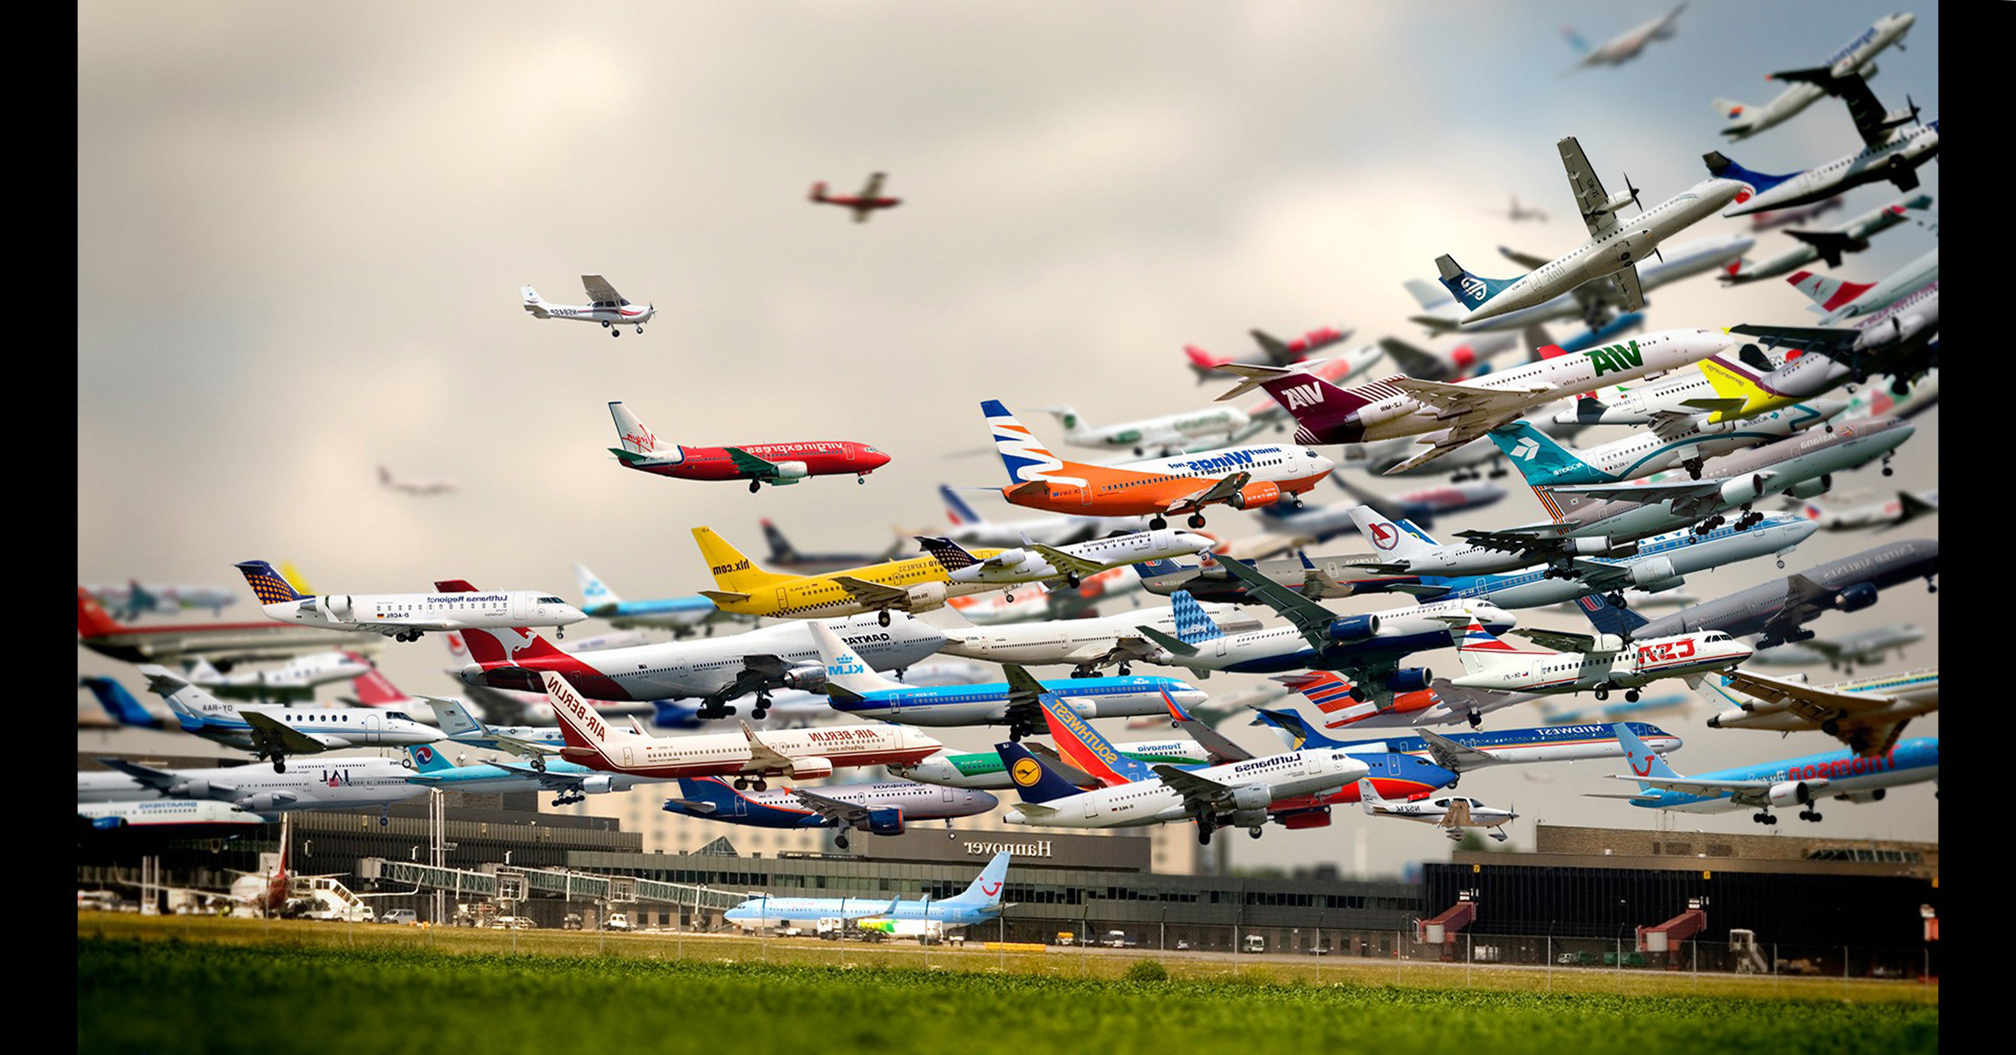 Many Airplanes In One Screen Wallpaper